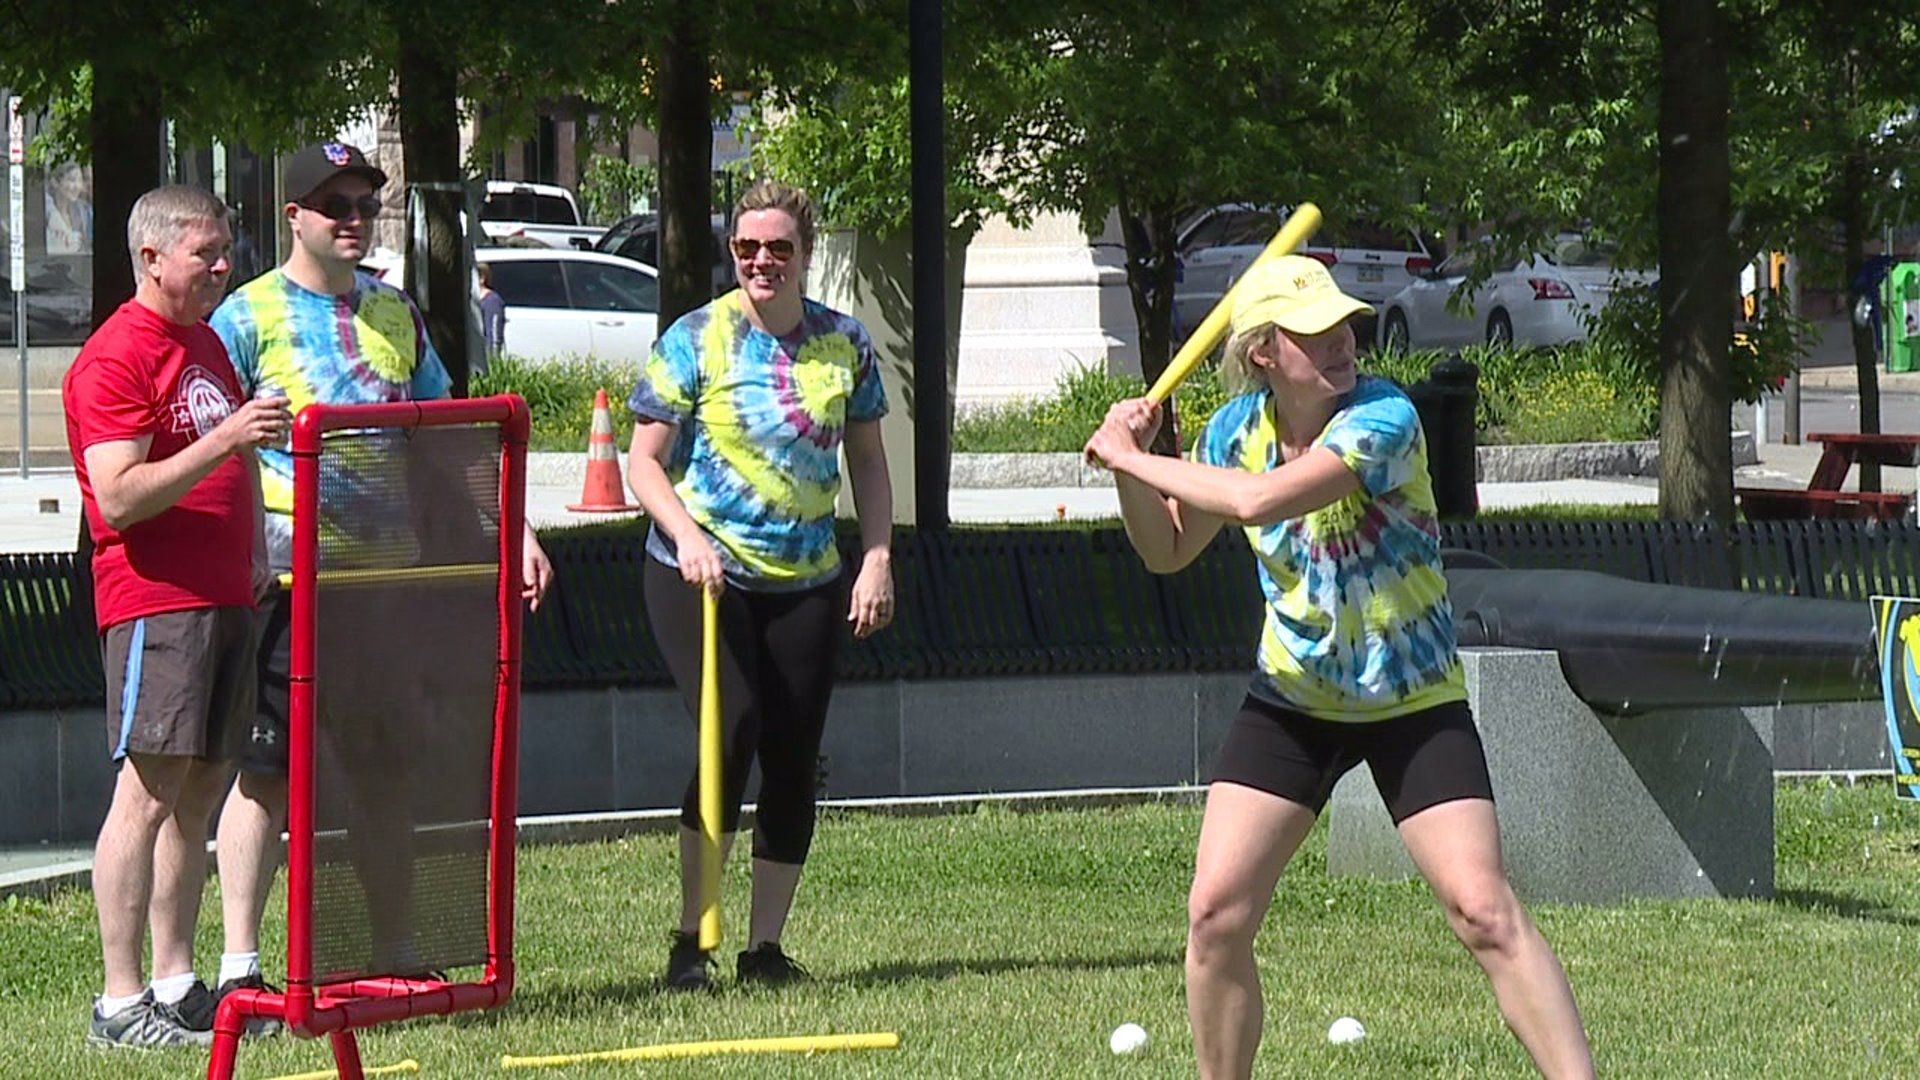 Sixth Annual Wiffle on the Square